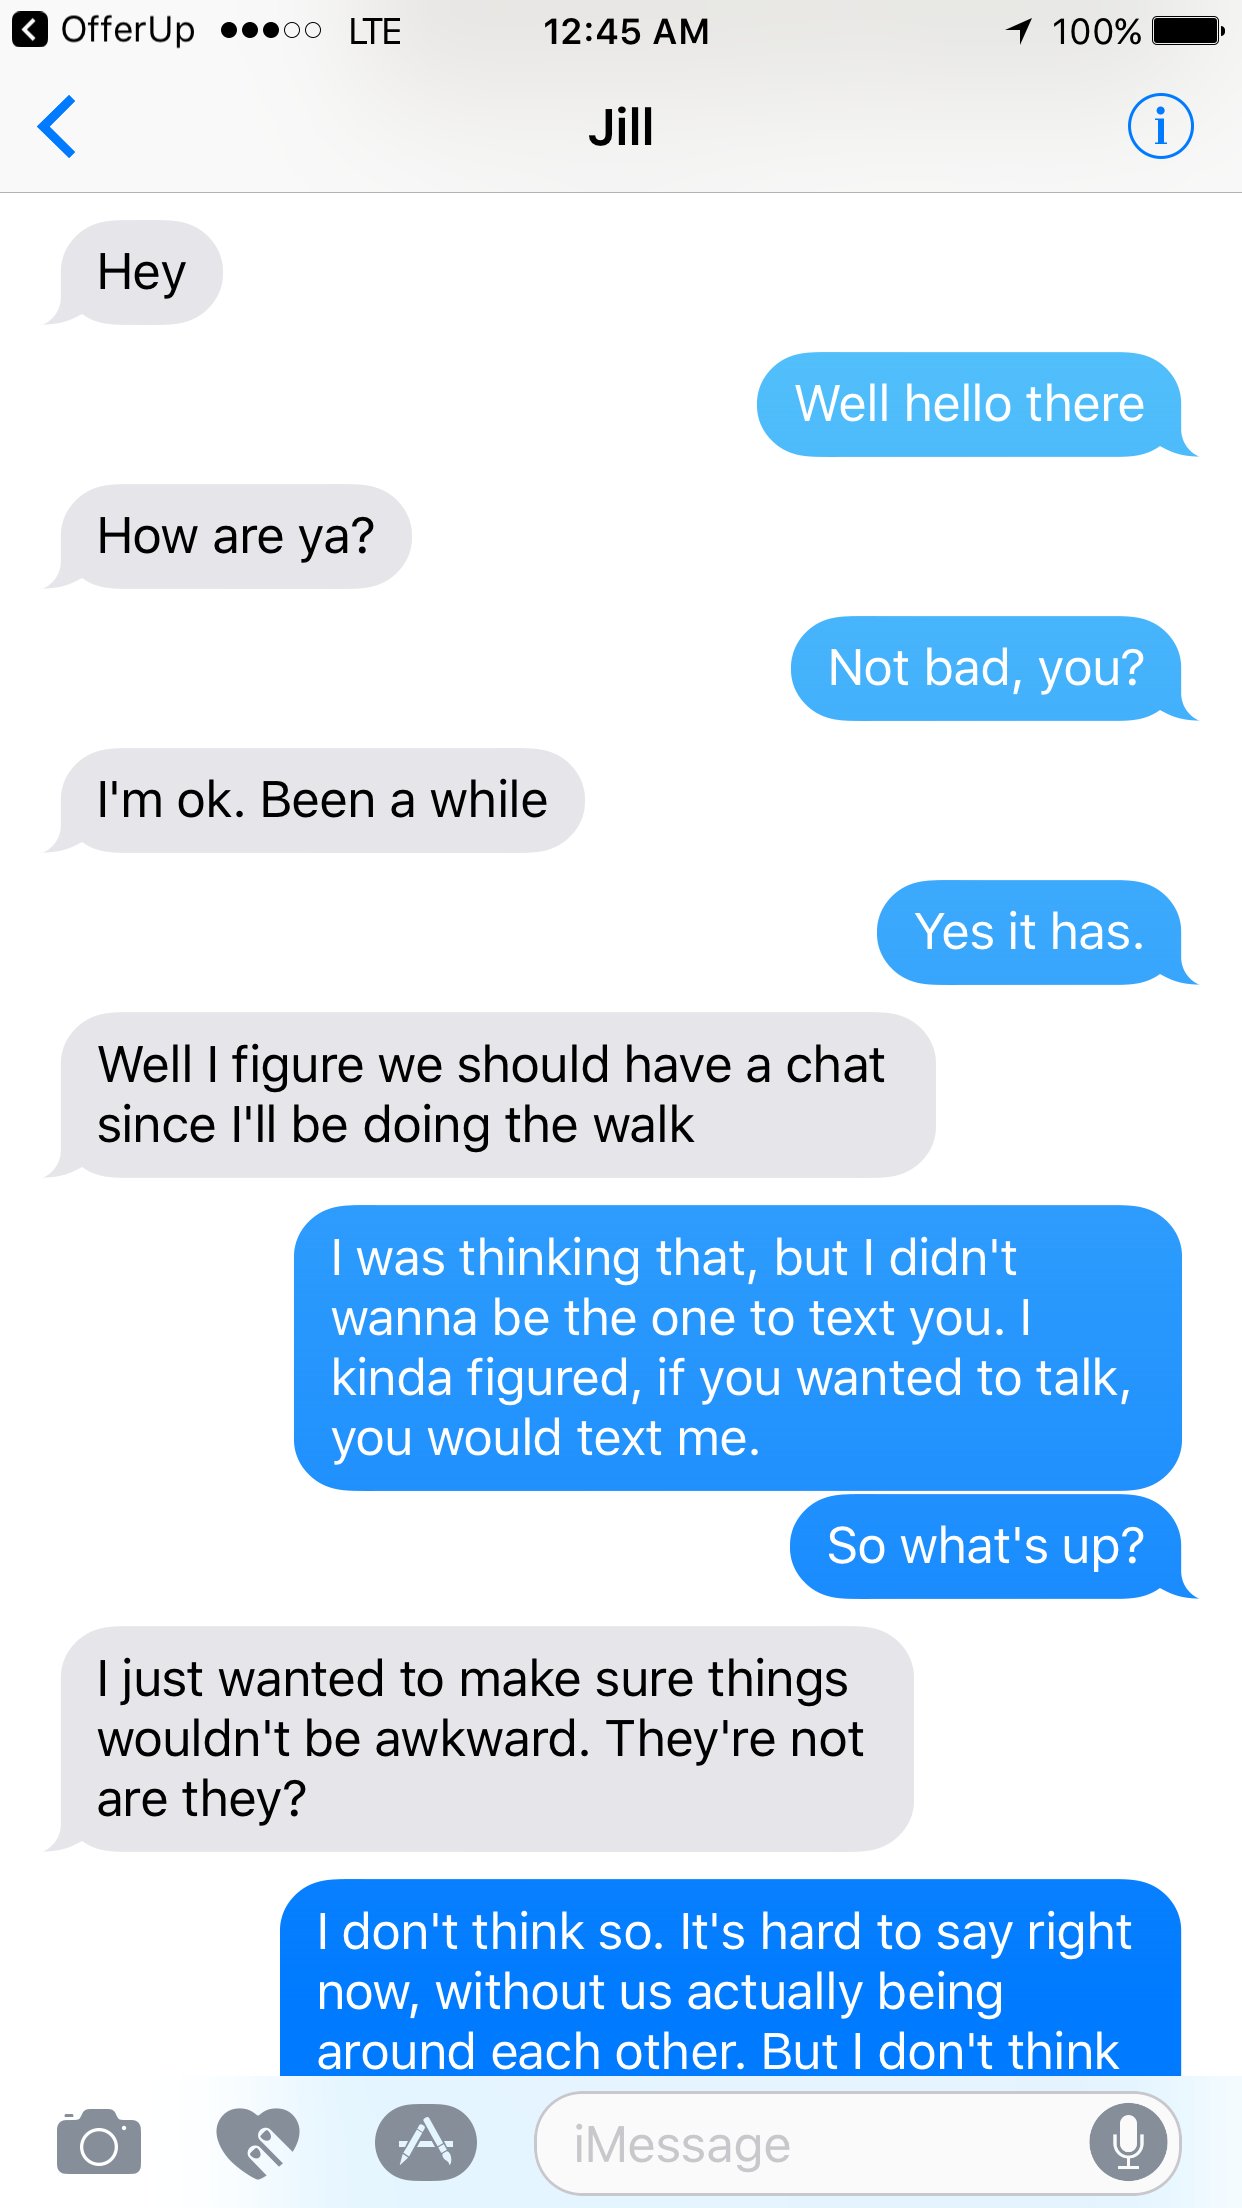 I'm pretty sure my cousin wants to have sex with me [UPDATE] - Something happened...